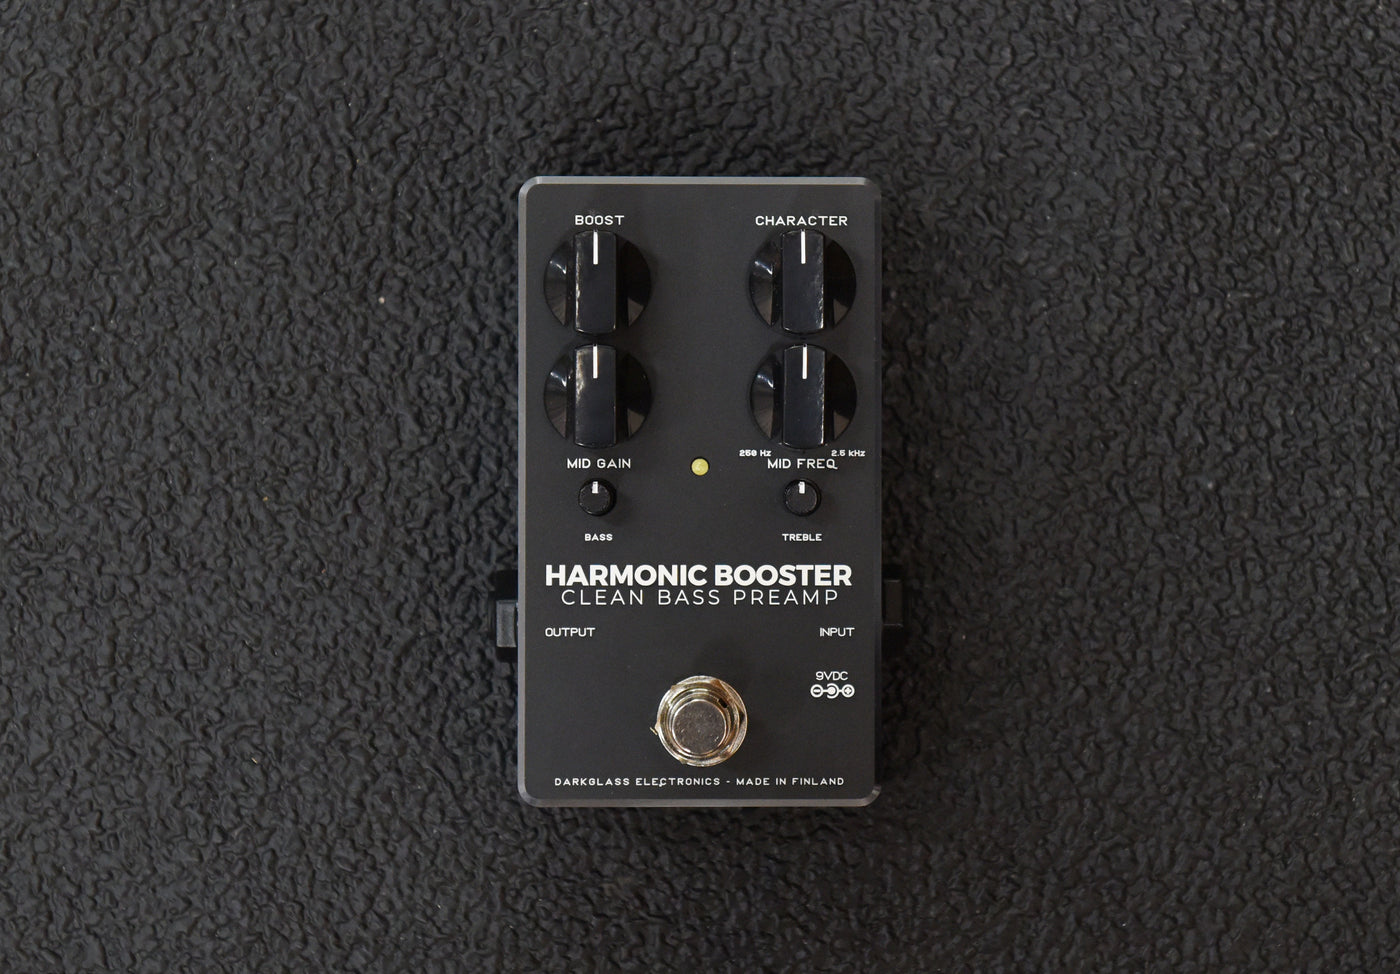 Harmonic Booster Clean Bass Preamp